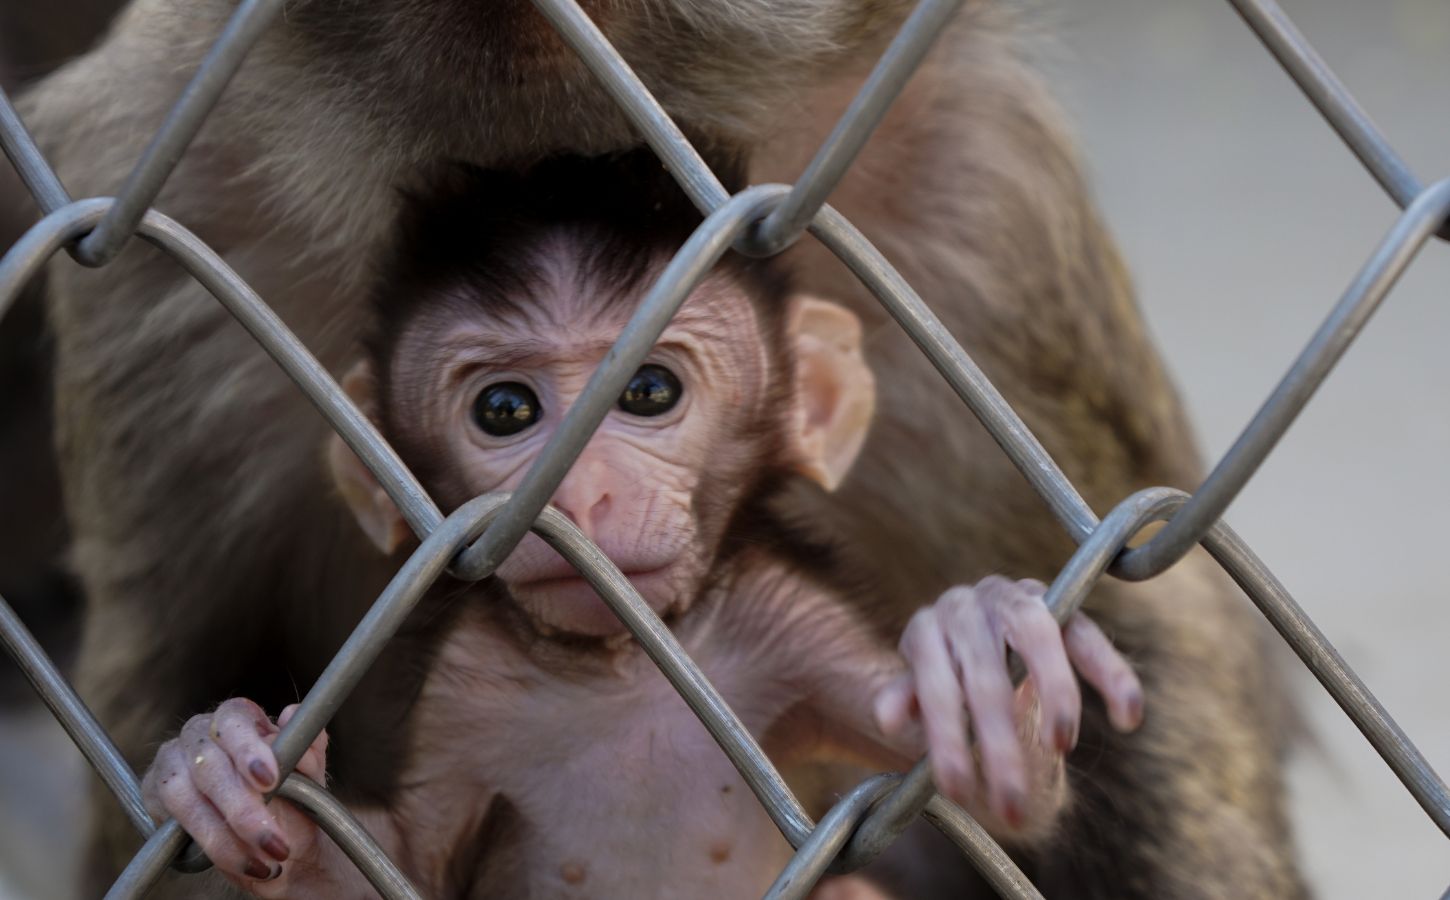 Opinion: Zoos Are Outdated And Immoral - The Cost Of Living Crisis Just  Proved It